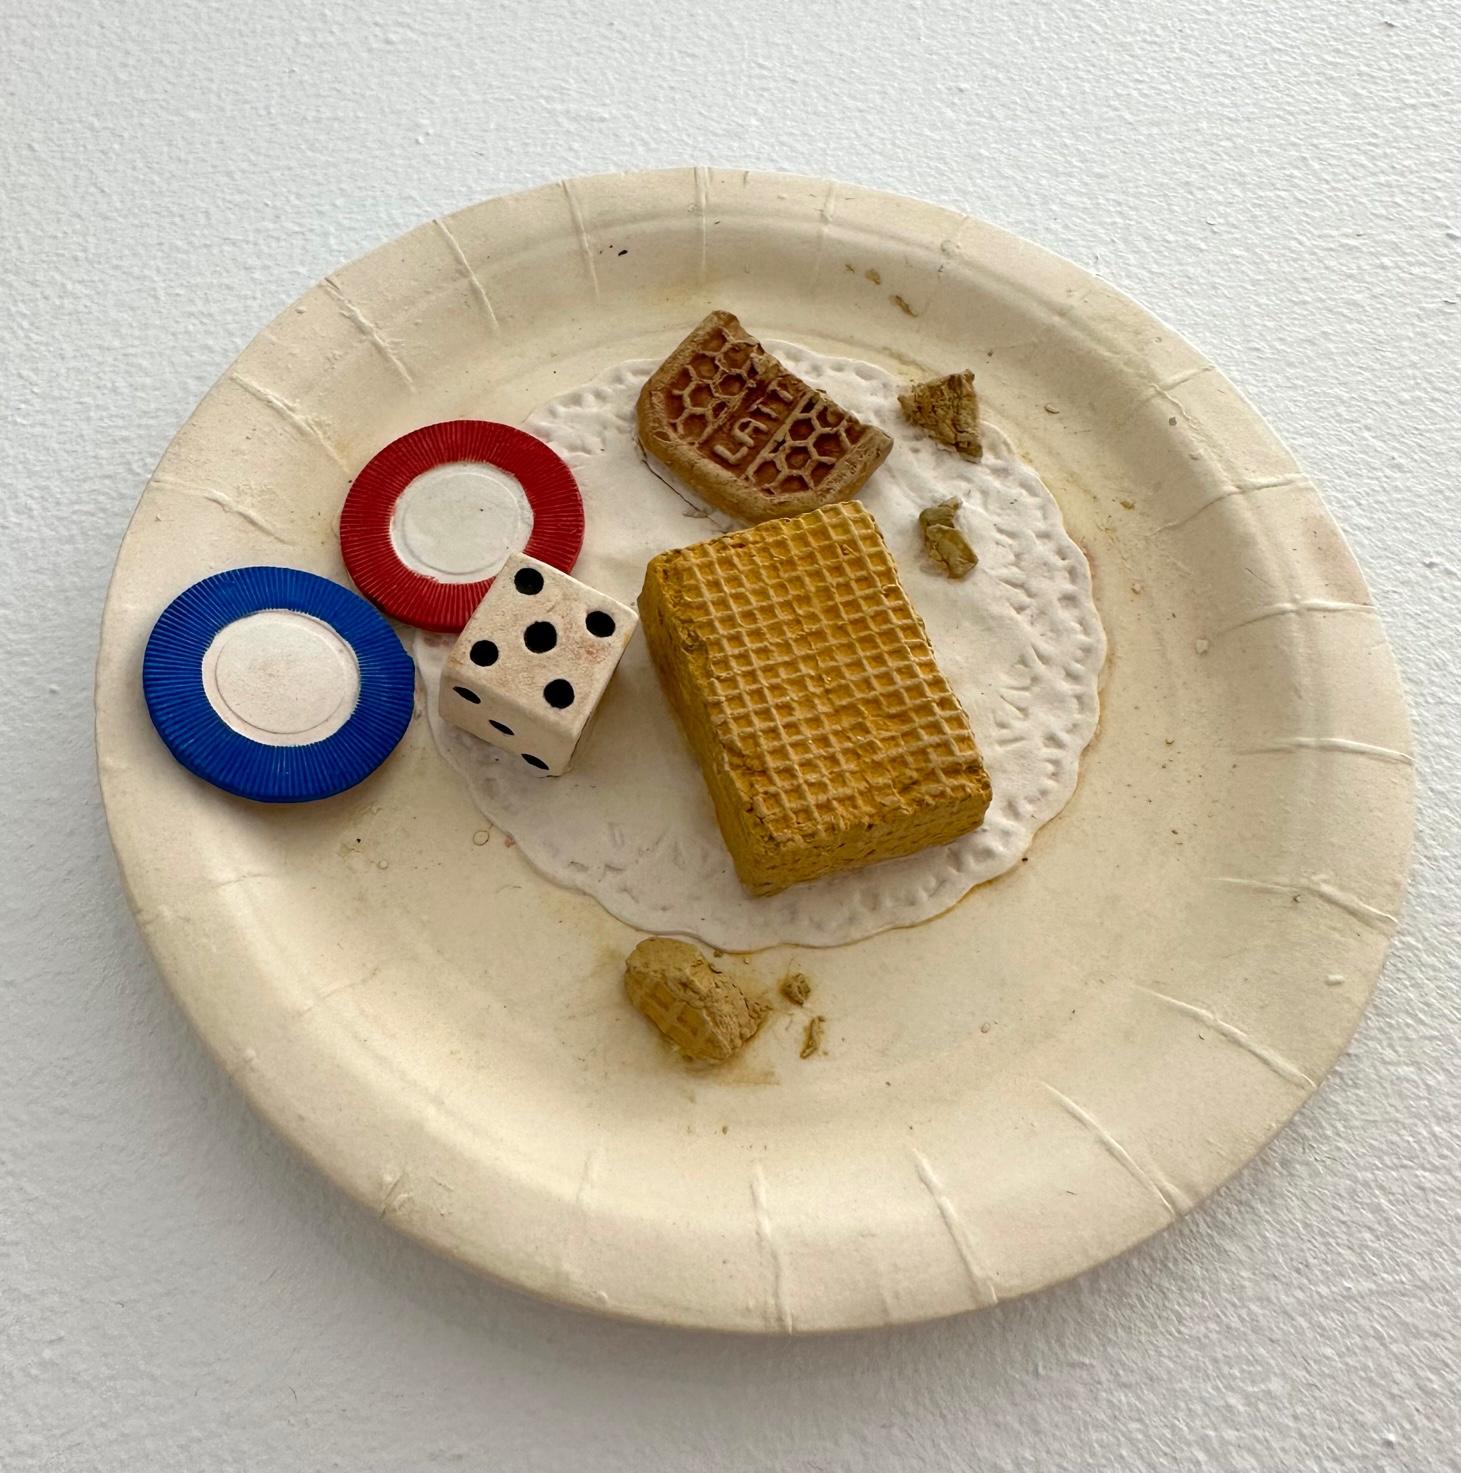 Richard Shaw Still-Life Sculpture - Paper Plate with Dice and Chip